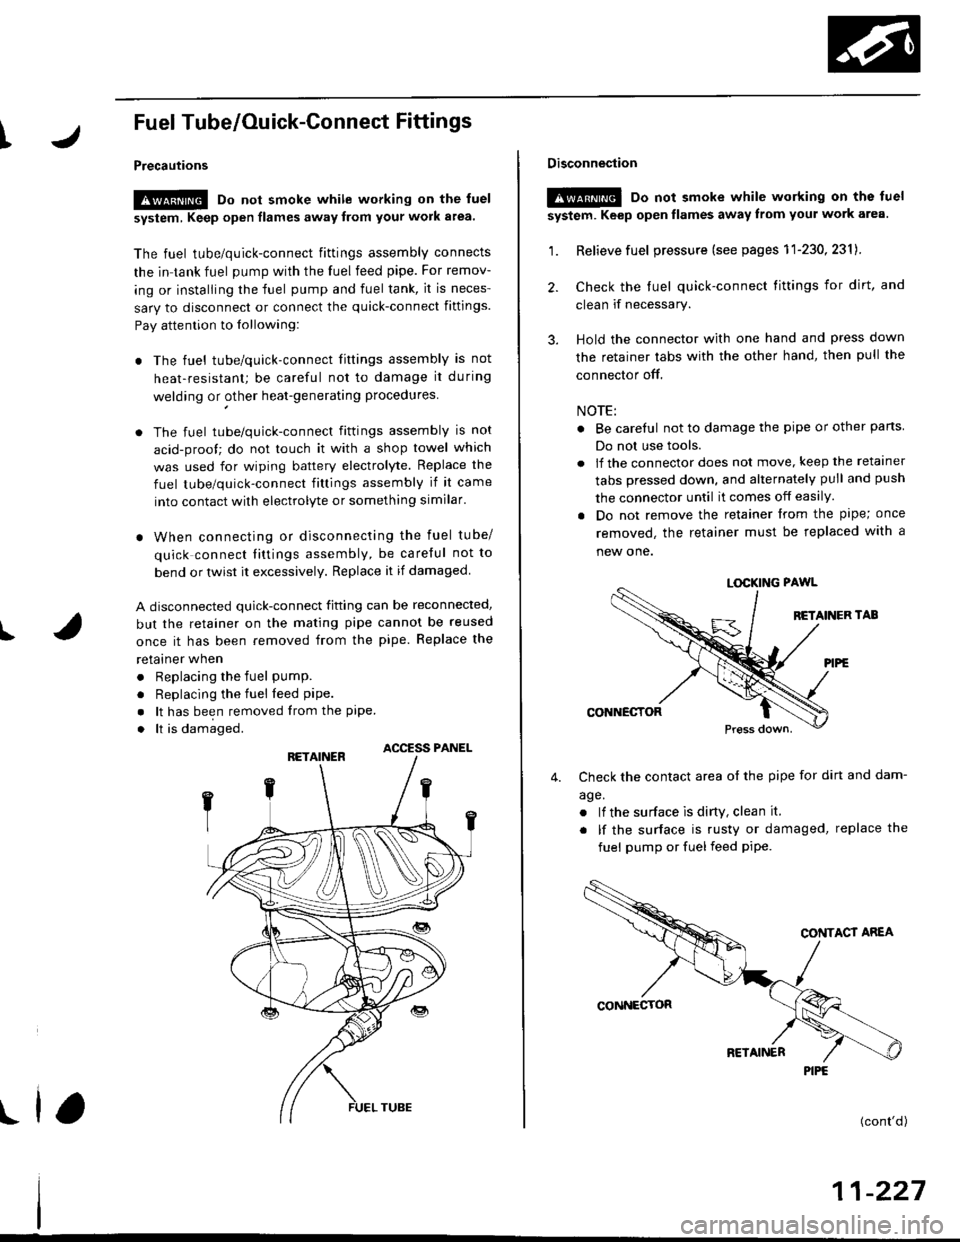 HONDA CIVIC 1996 6.G Service Manual I
Fuel Tube/Ouick-Gonnect Fittings
Precautions
!@ Do not smoke while working on the fuel
system, Keep open flames away from your work a.ea
The fuel tube/quick-connect fittings assembly connects
the i